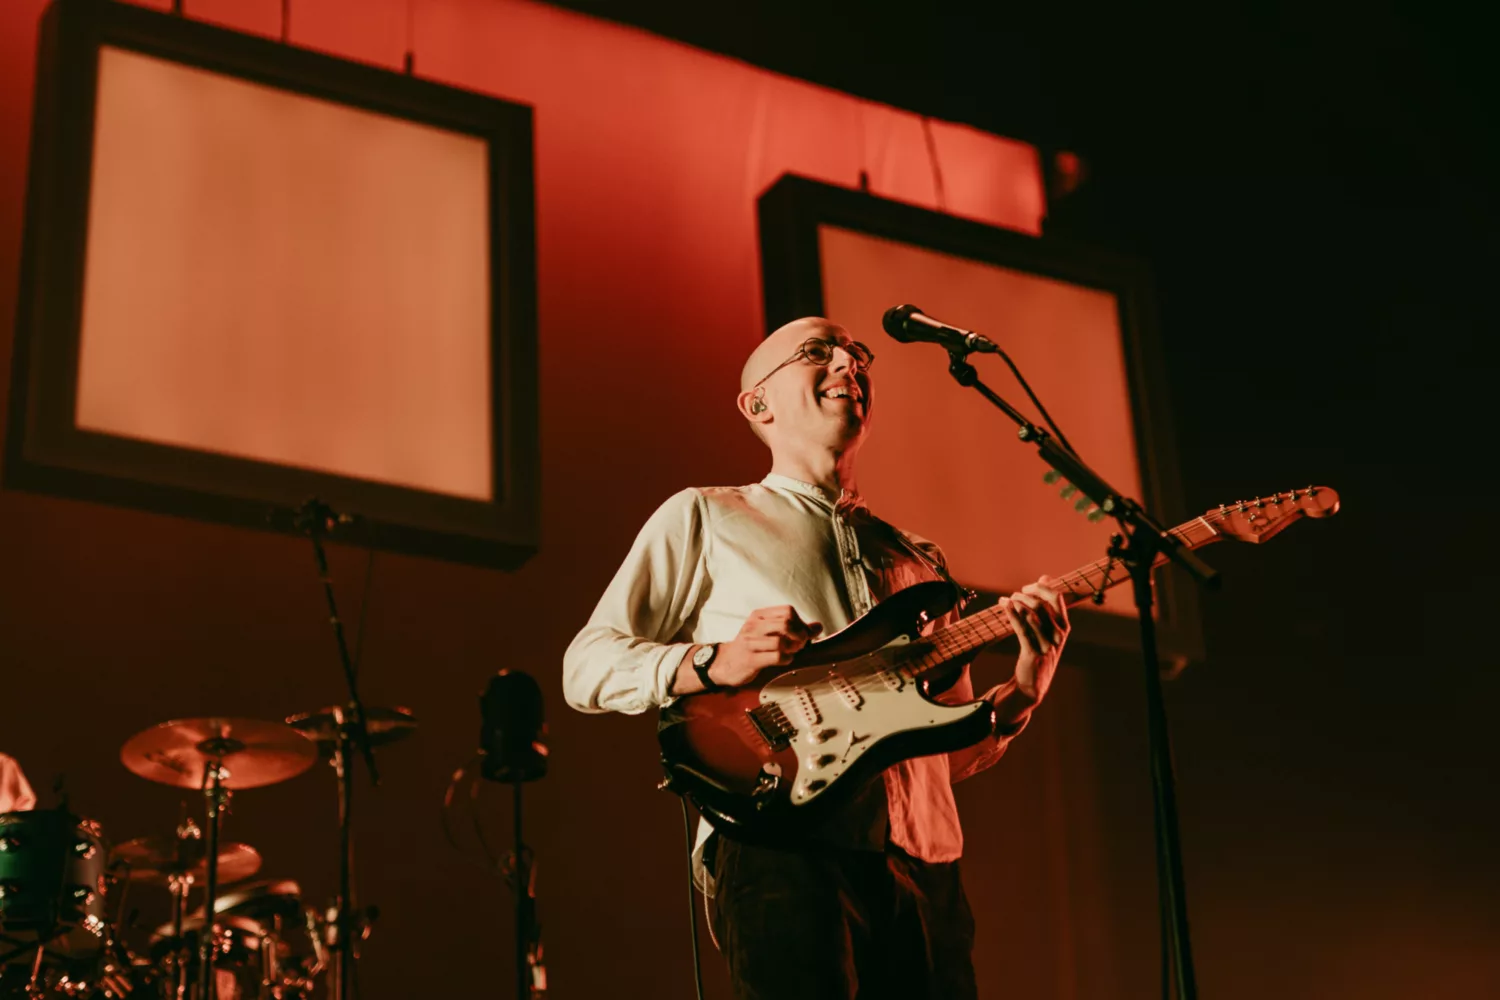 Bombay Bicycle Club to perform 'I Had The Blues But I Shook Them Loose' in full